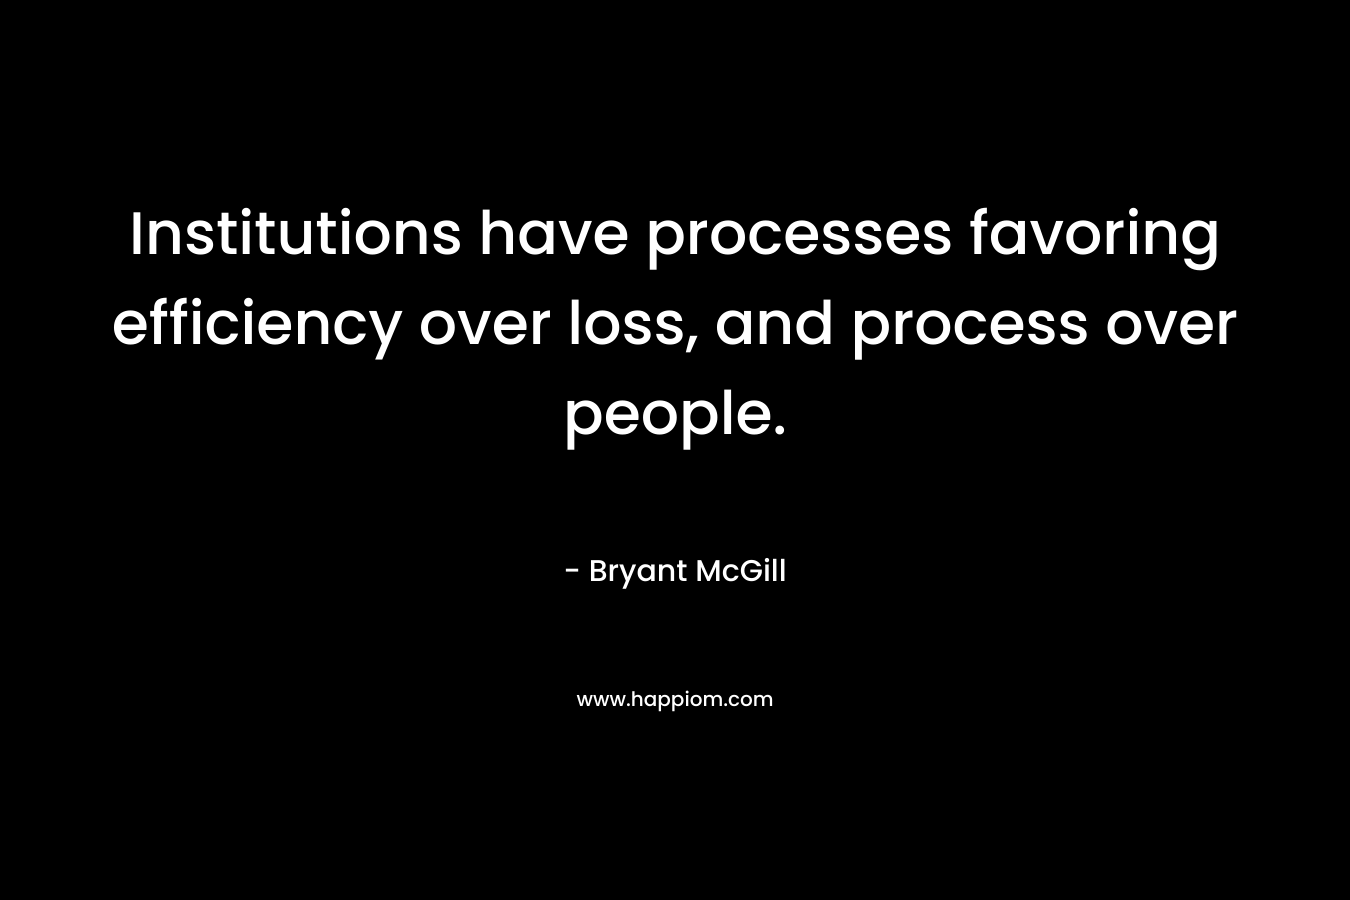 Institutions have processes favoring efficiency over loss, and process over people.